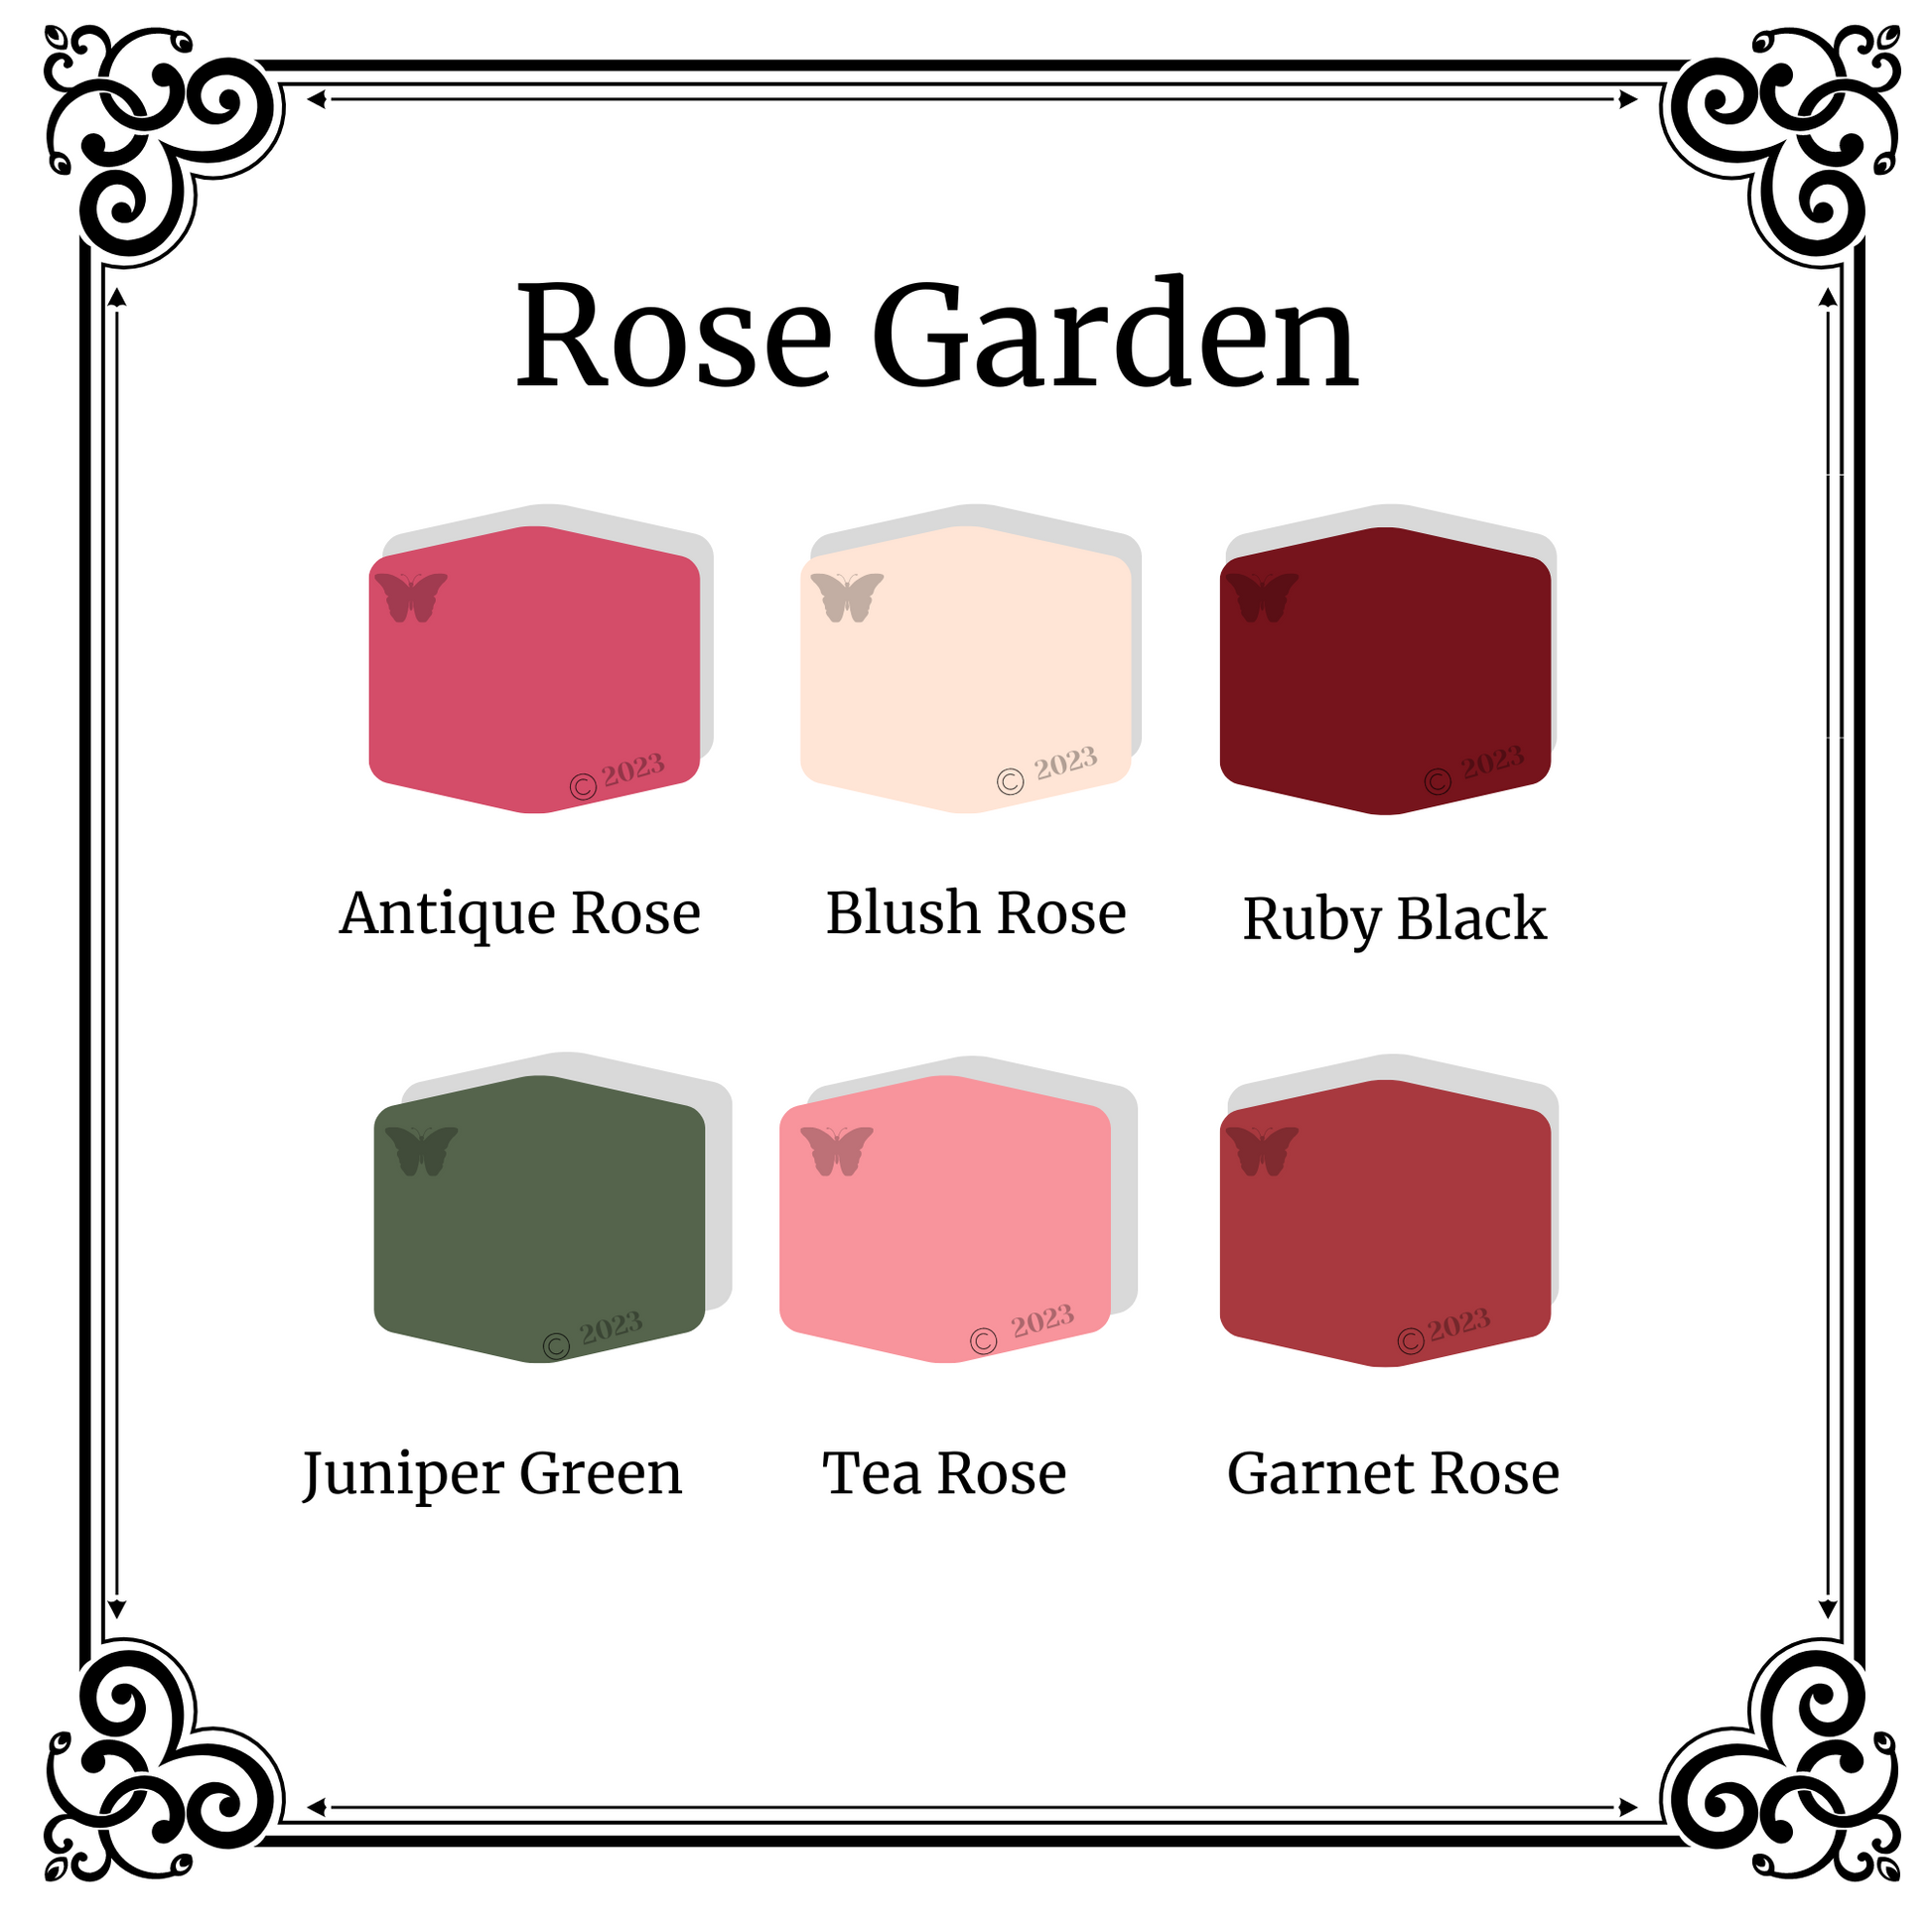 A black and white Victorian frame around 6 hexagons in shades of coffee.  The title is Rose Garden and the 6 colors are Antique Rose, Blush Rose, Ruby Black, Juniper Green, Tea Rose and Garnet Rose